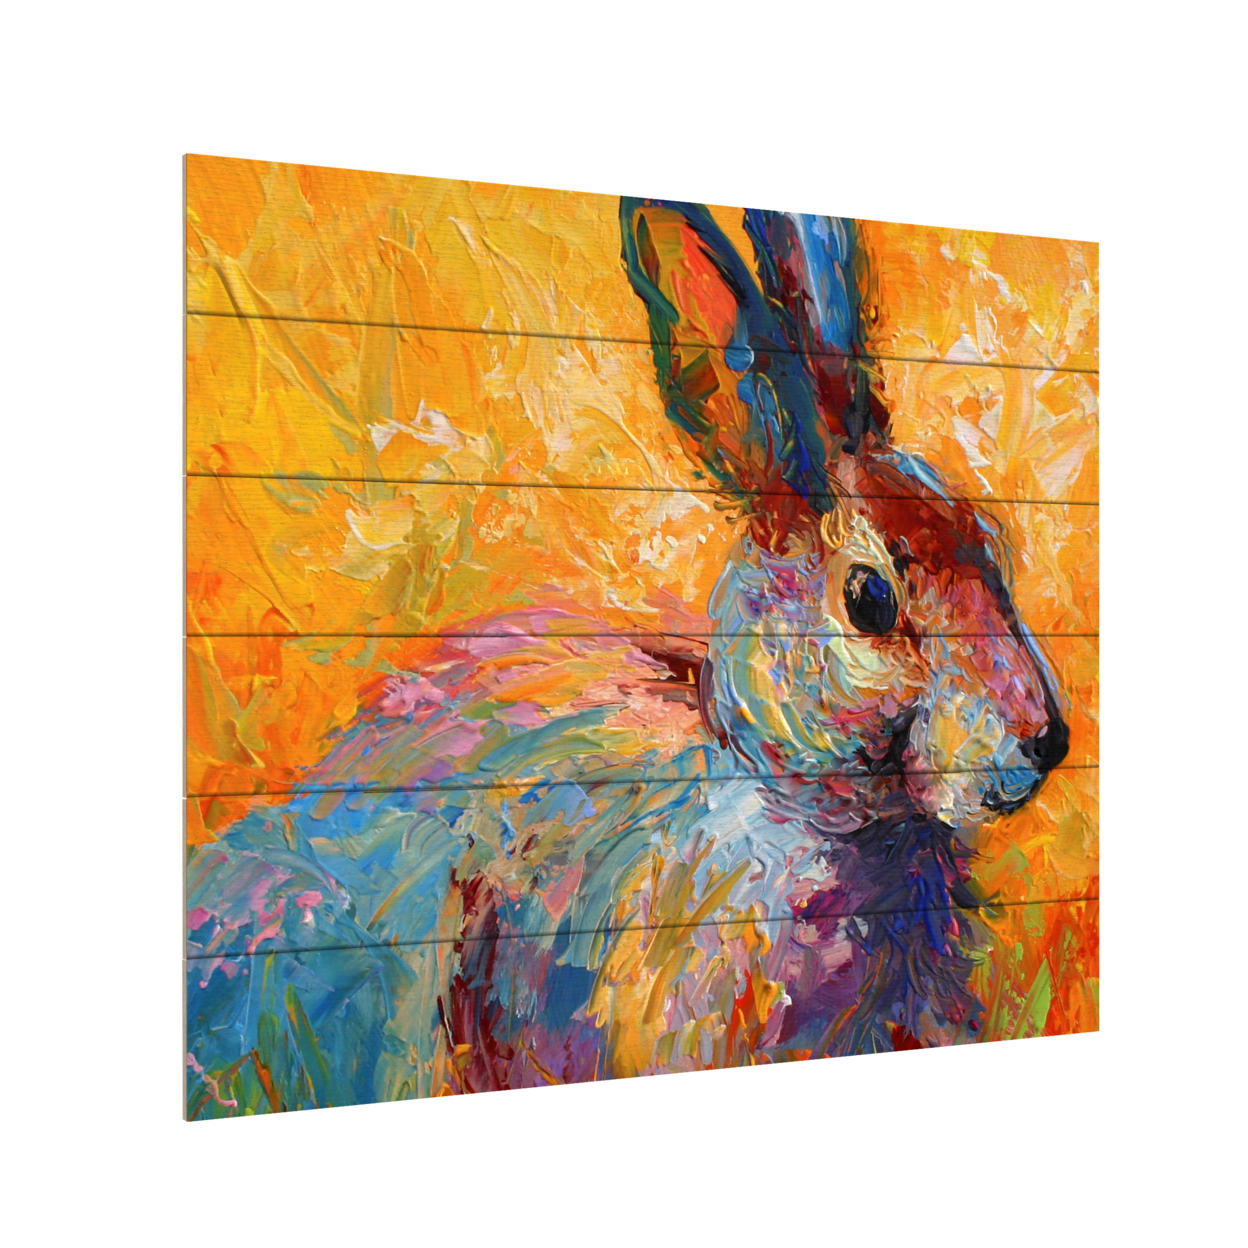 Wooden Slat Art 18 X 22 Inches Titled Bunny IV Ready To Hang Home Decor Picture